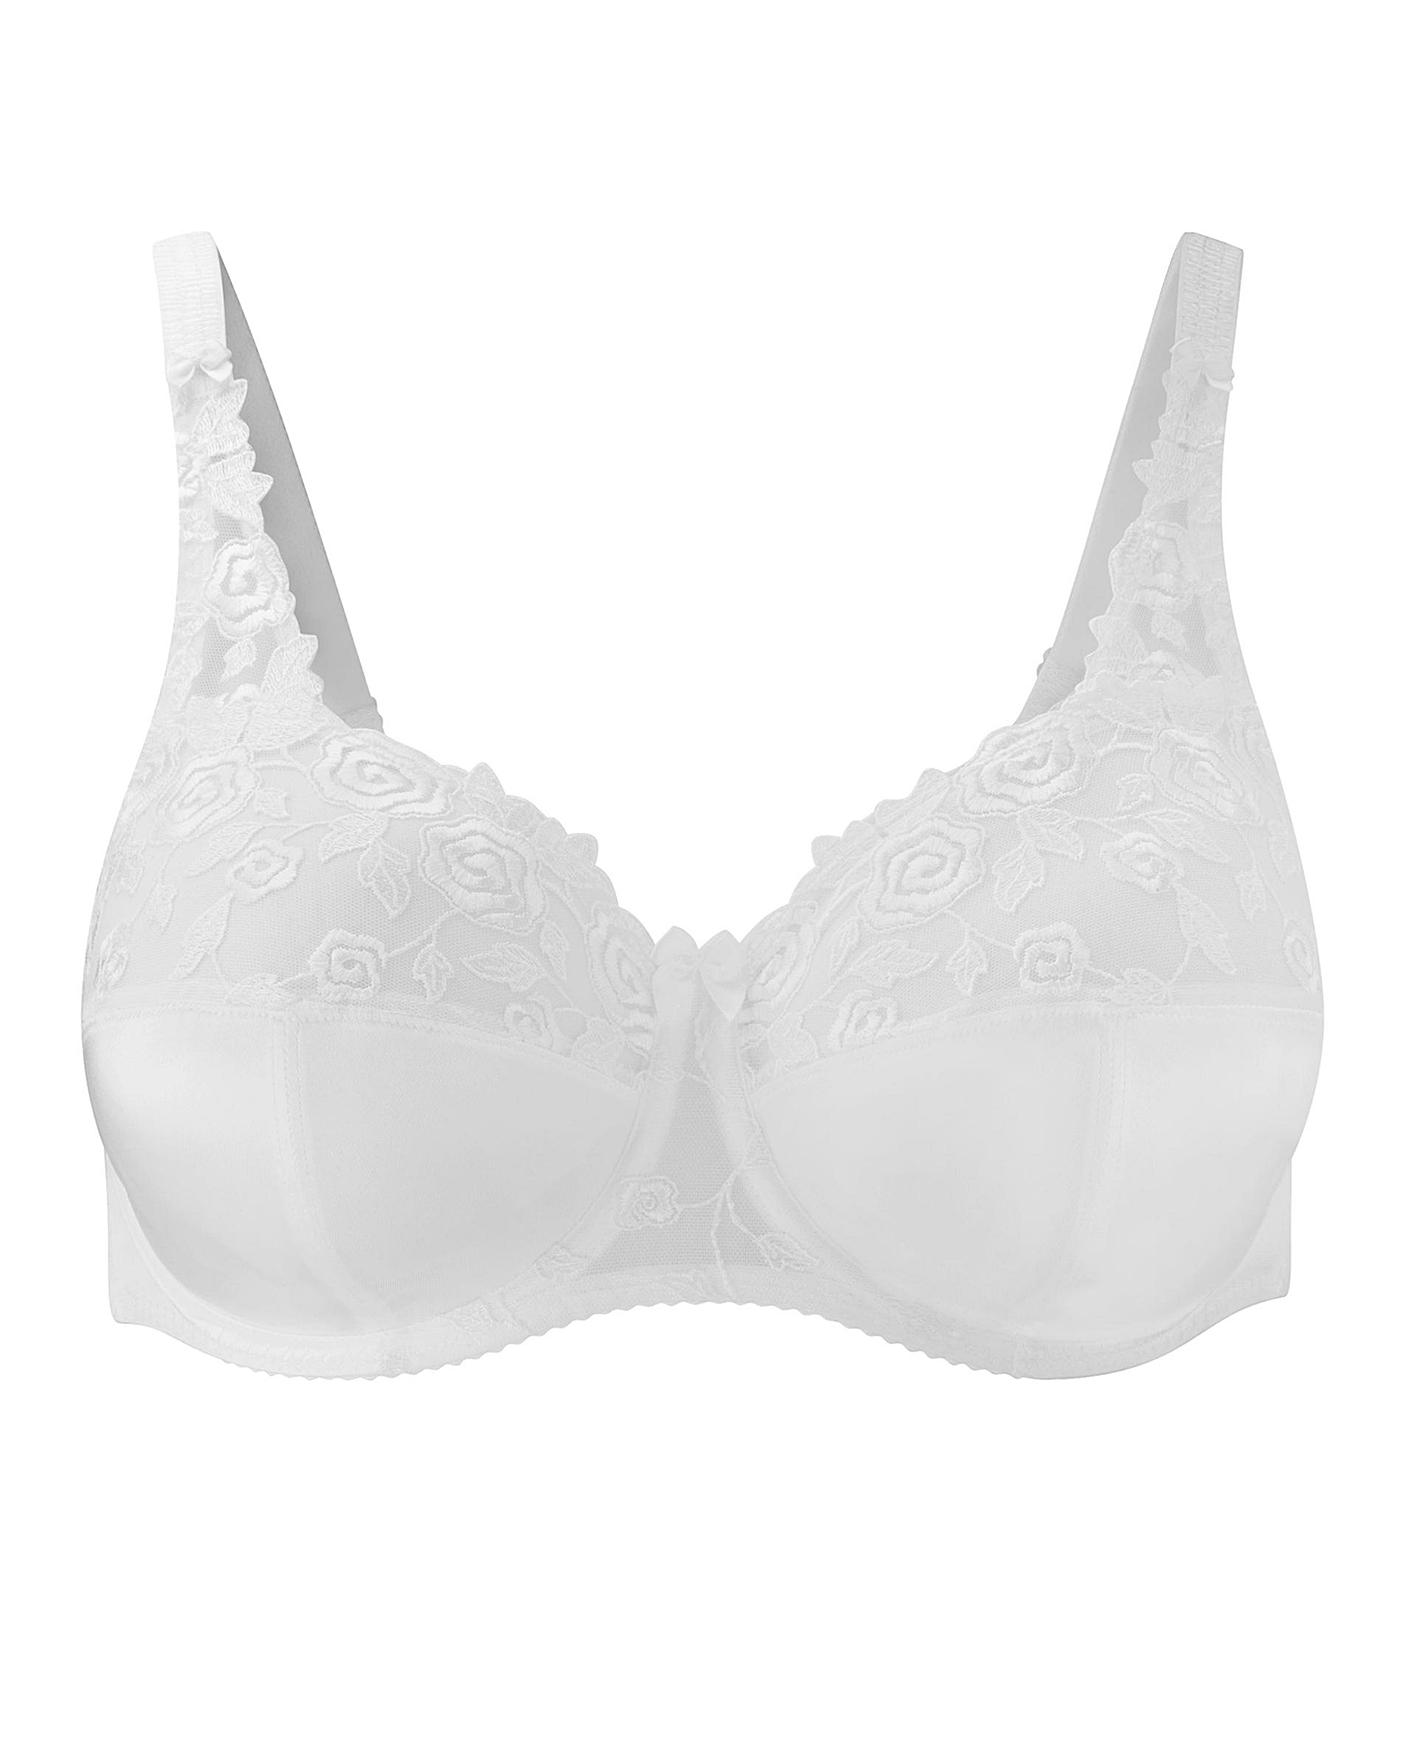 Naturana Underwired Non-Padded Full Cup Bra - Belle Lingerie